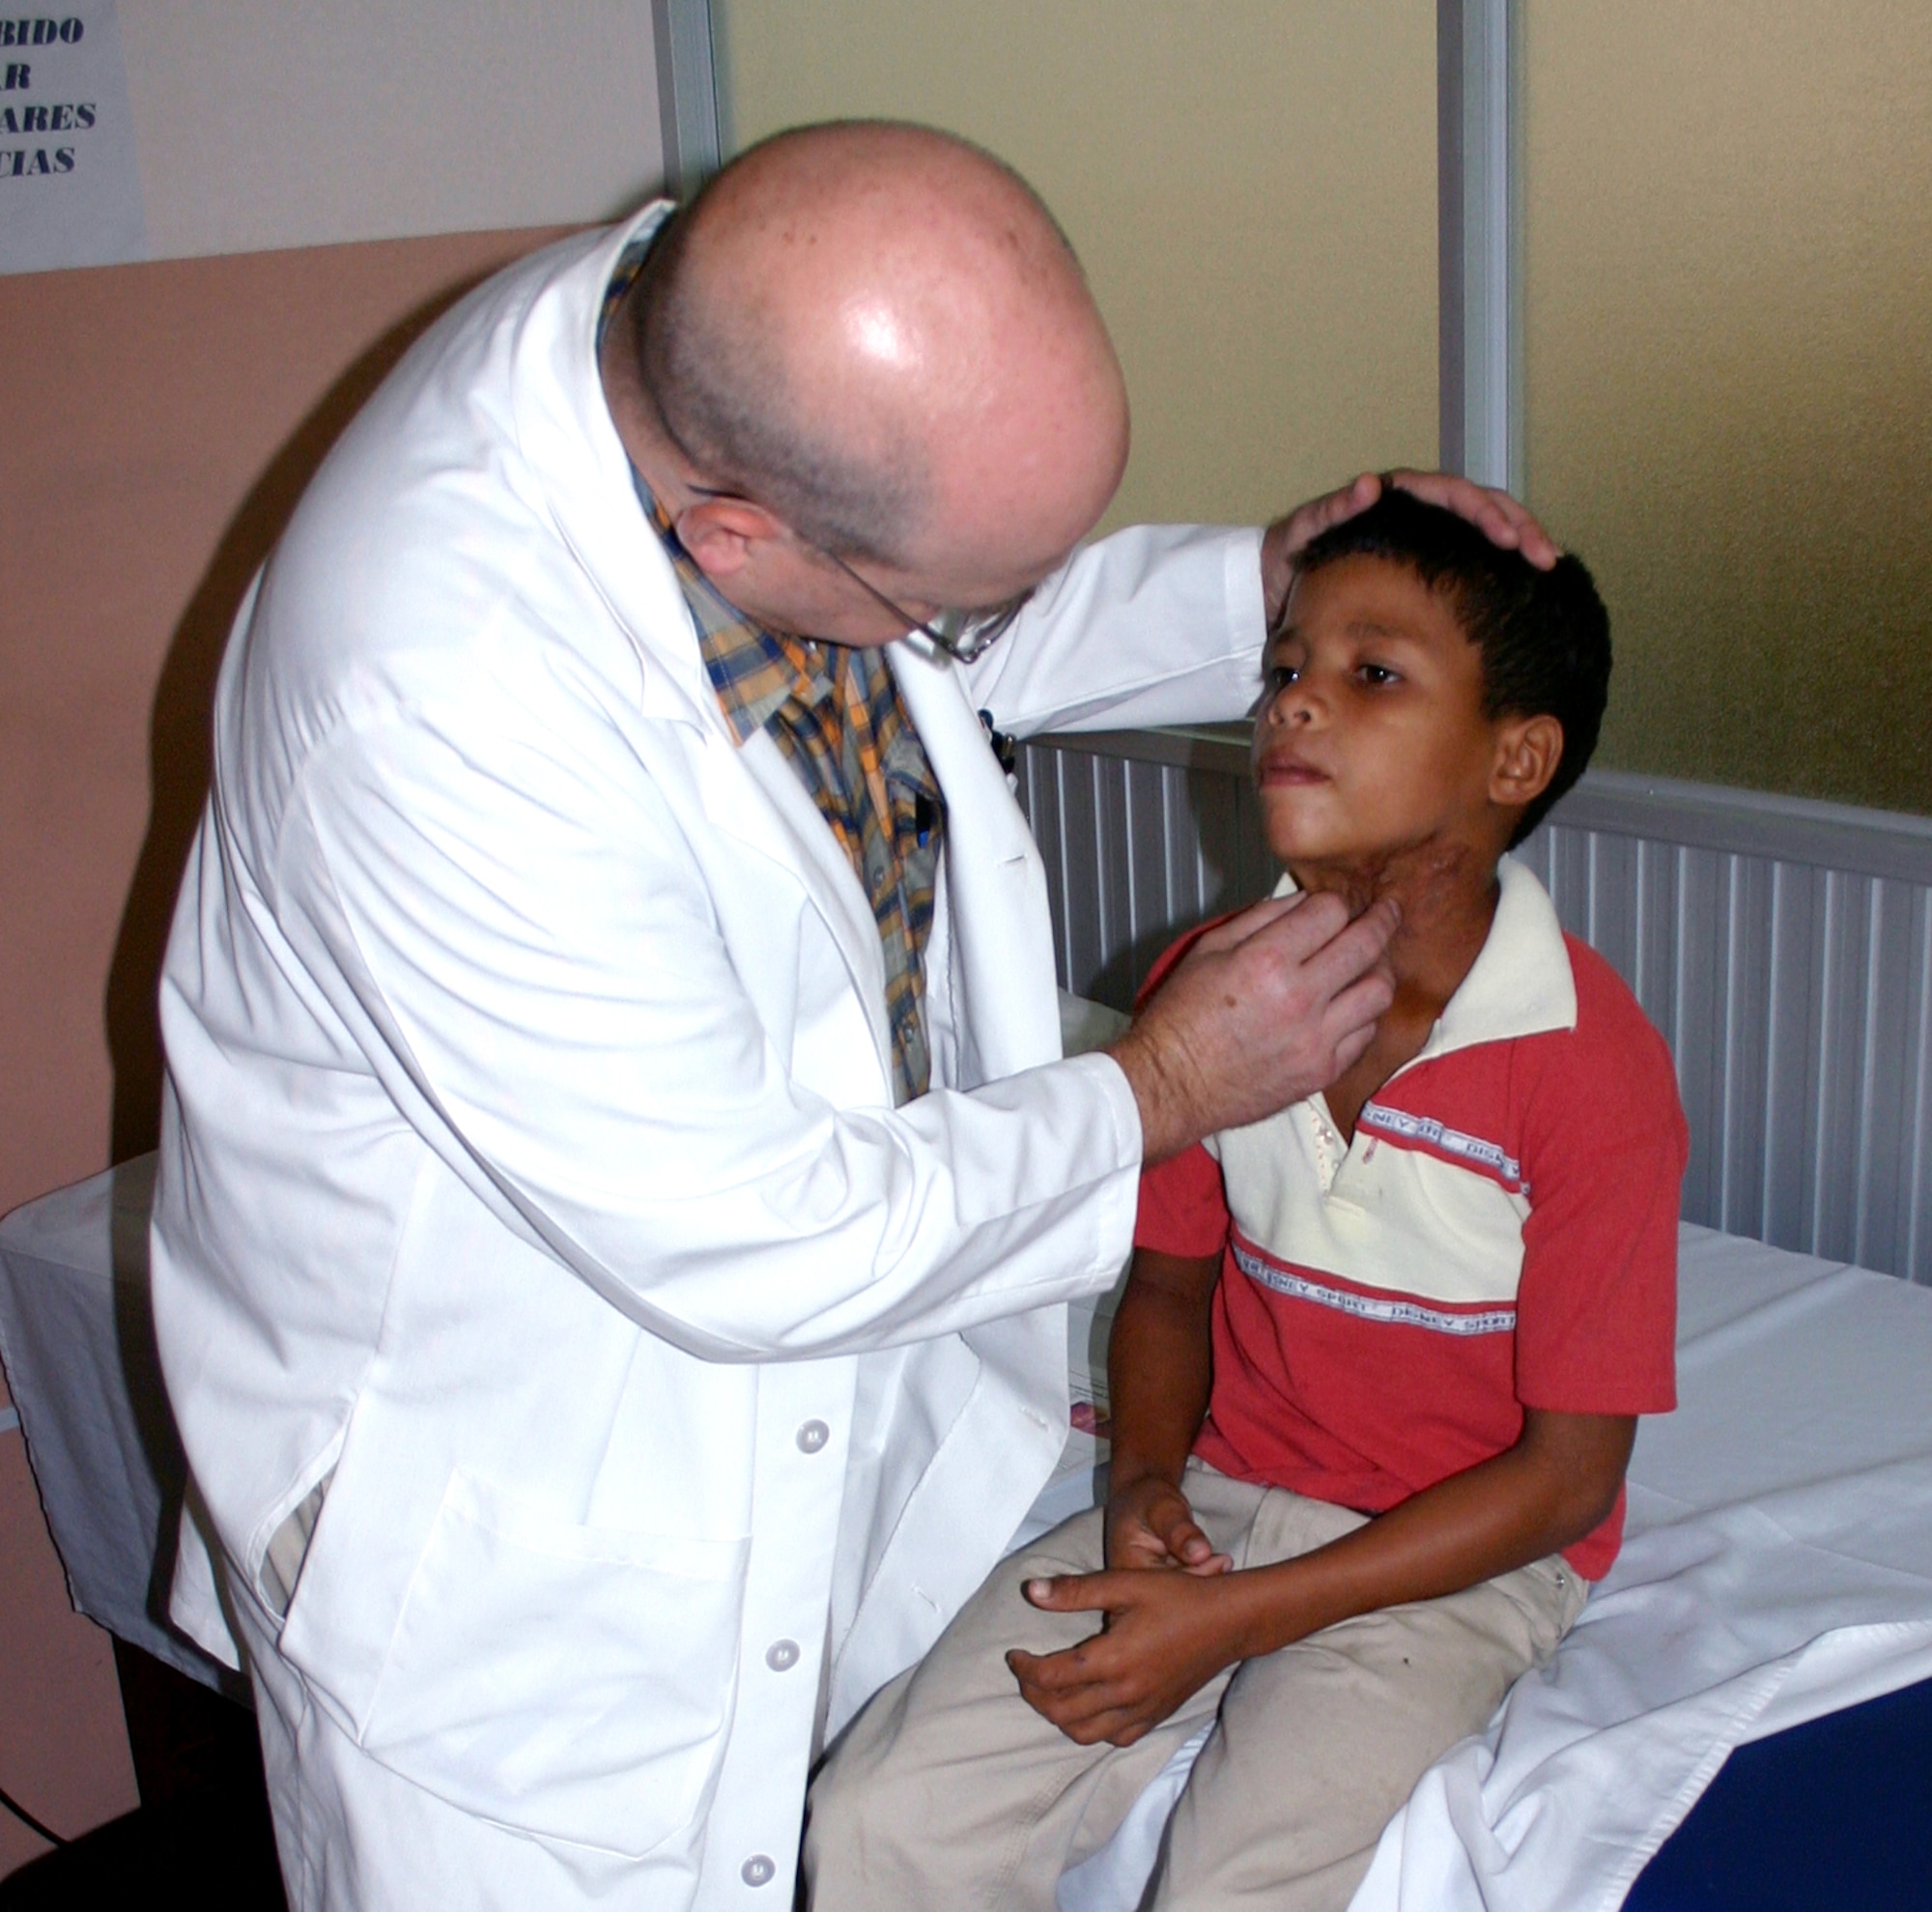 Col. (Dr.) Charles Hardin checks the burn injuries of an Ecuadorian boy during a screening with the first Medical Readiness Training Exercise team in Esmereldas, Ecuador. Colonel Hardin is a surgeon at Wilford Hall Medical Center at Lackland Air Force Base, Texas. (U.S. Air Force photo/2nd Lt. David Herndon) 
